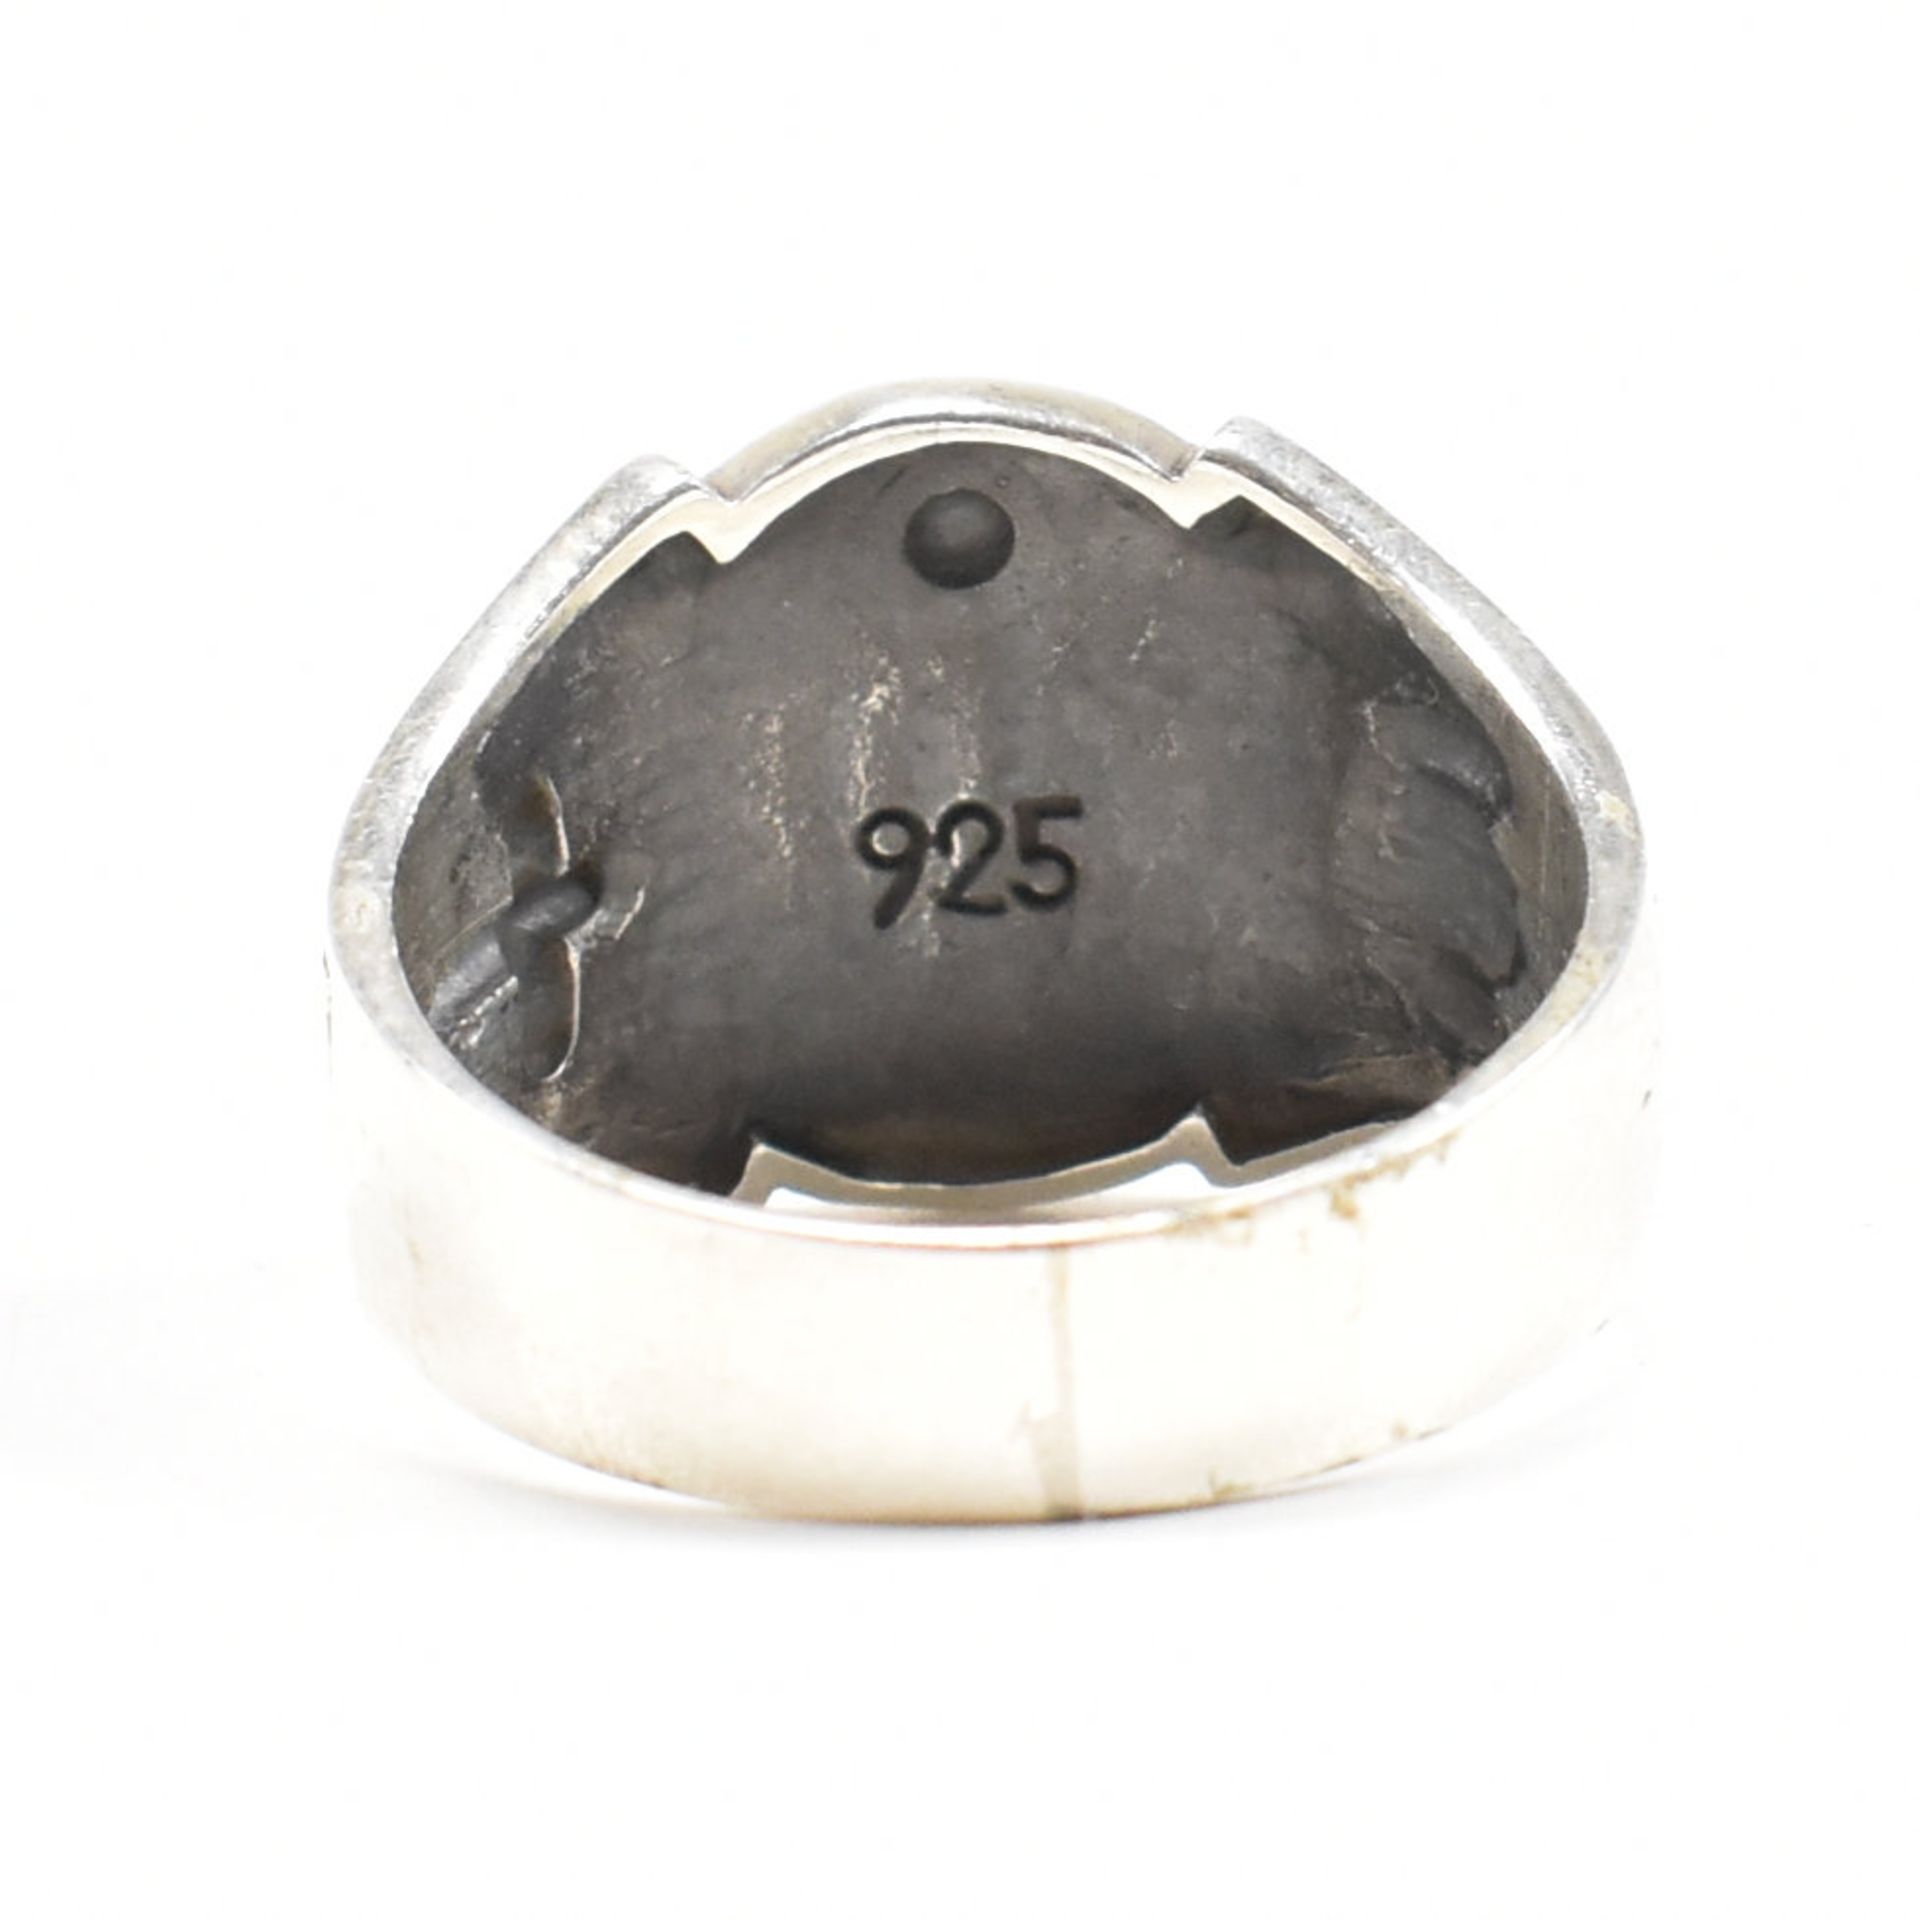 CONTEMPORARY 925 SILVER MASONIC STYLE RING - Image 6 of 7